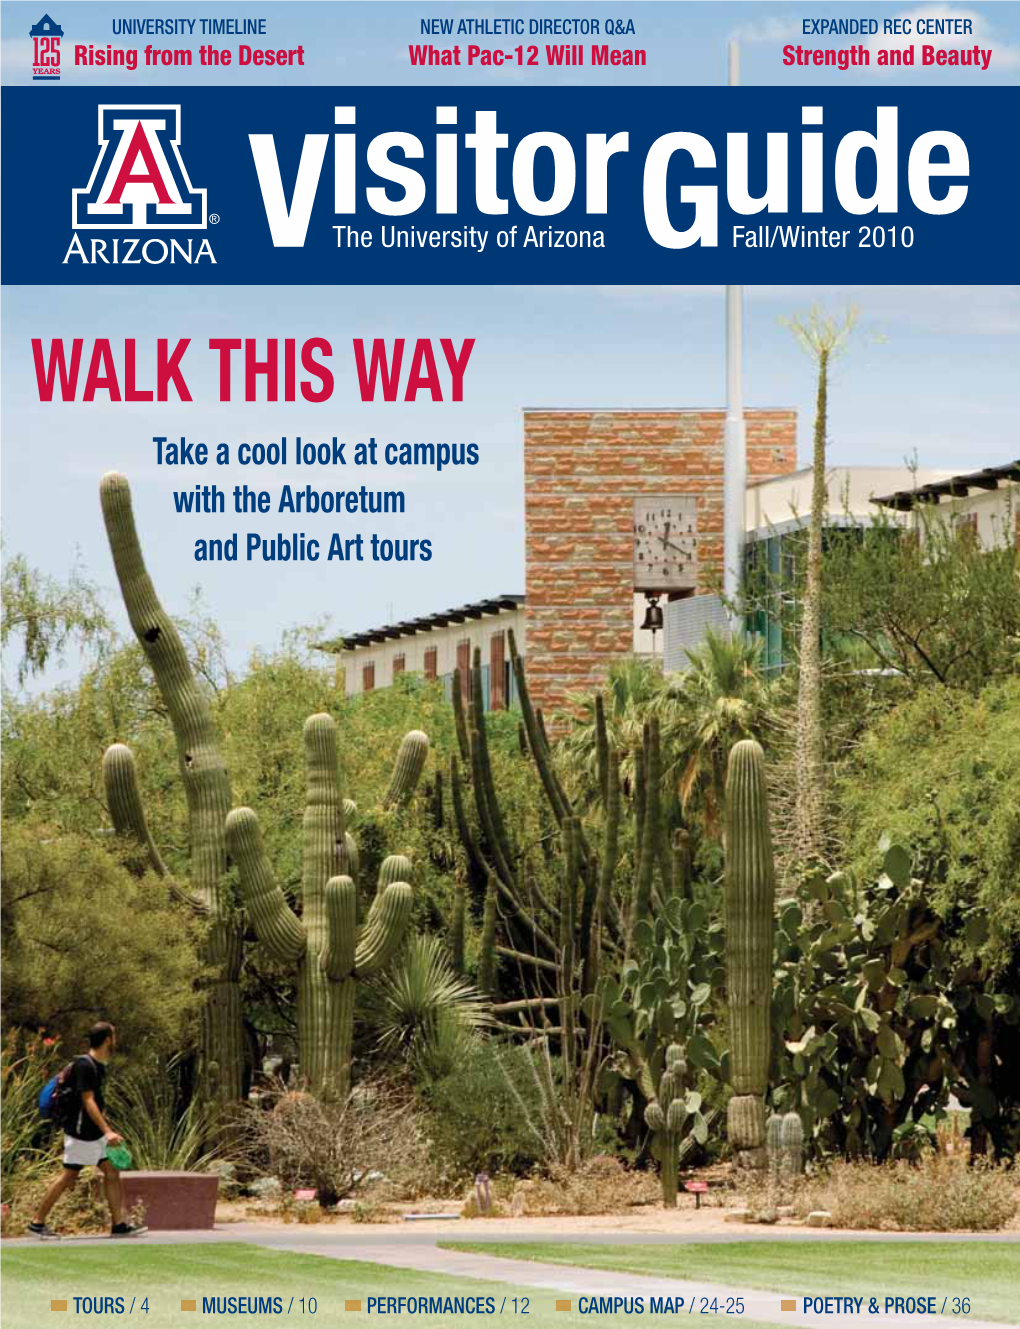 WALK THIS WAY Take a Cool Look at Campus with the Arboretum and Public Art Tours